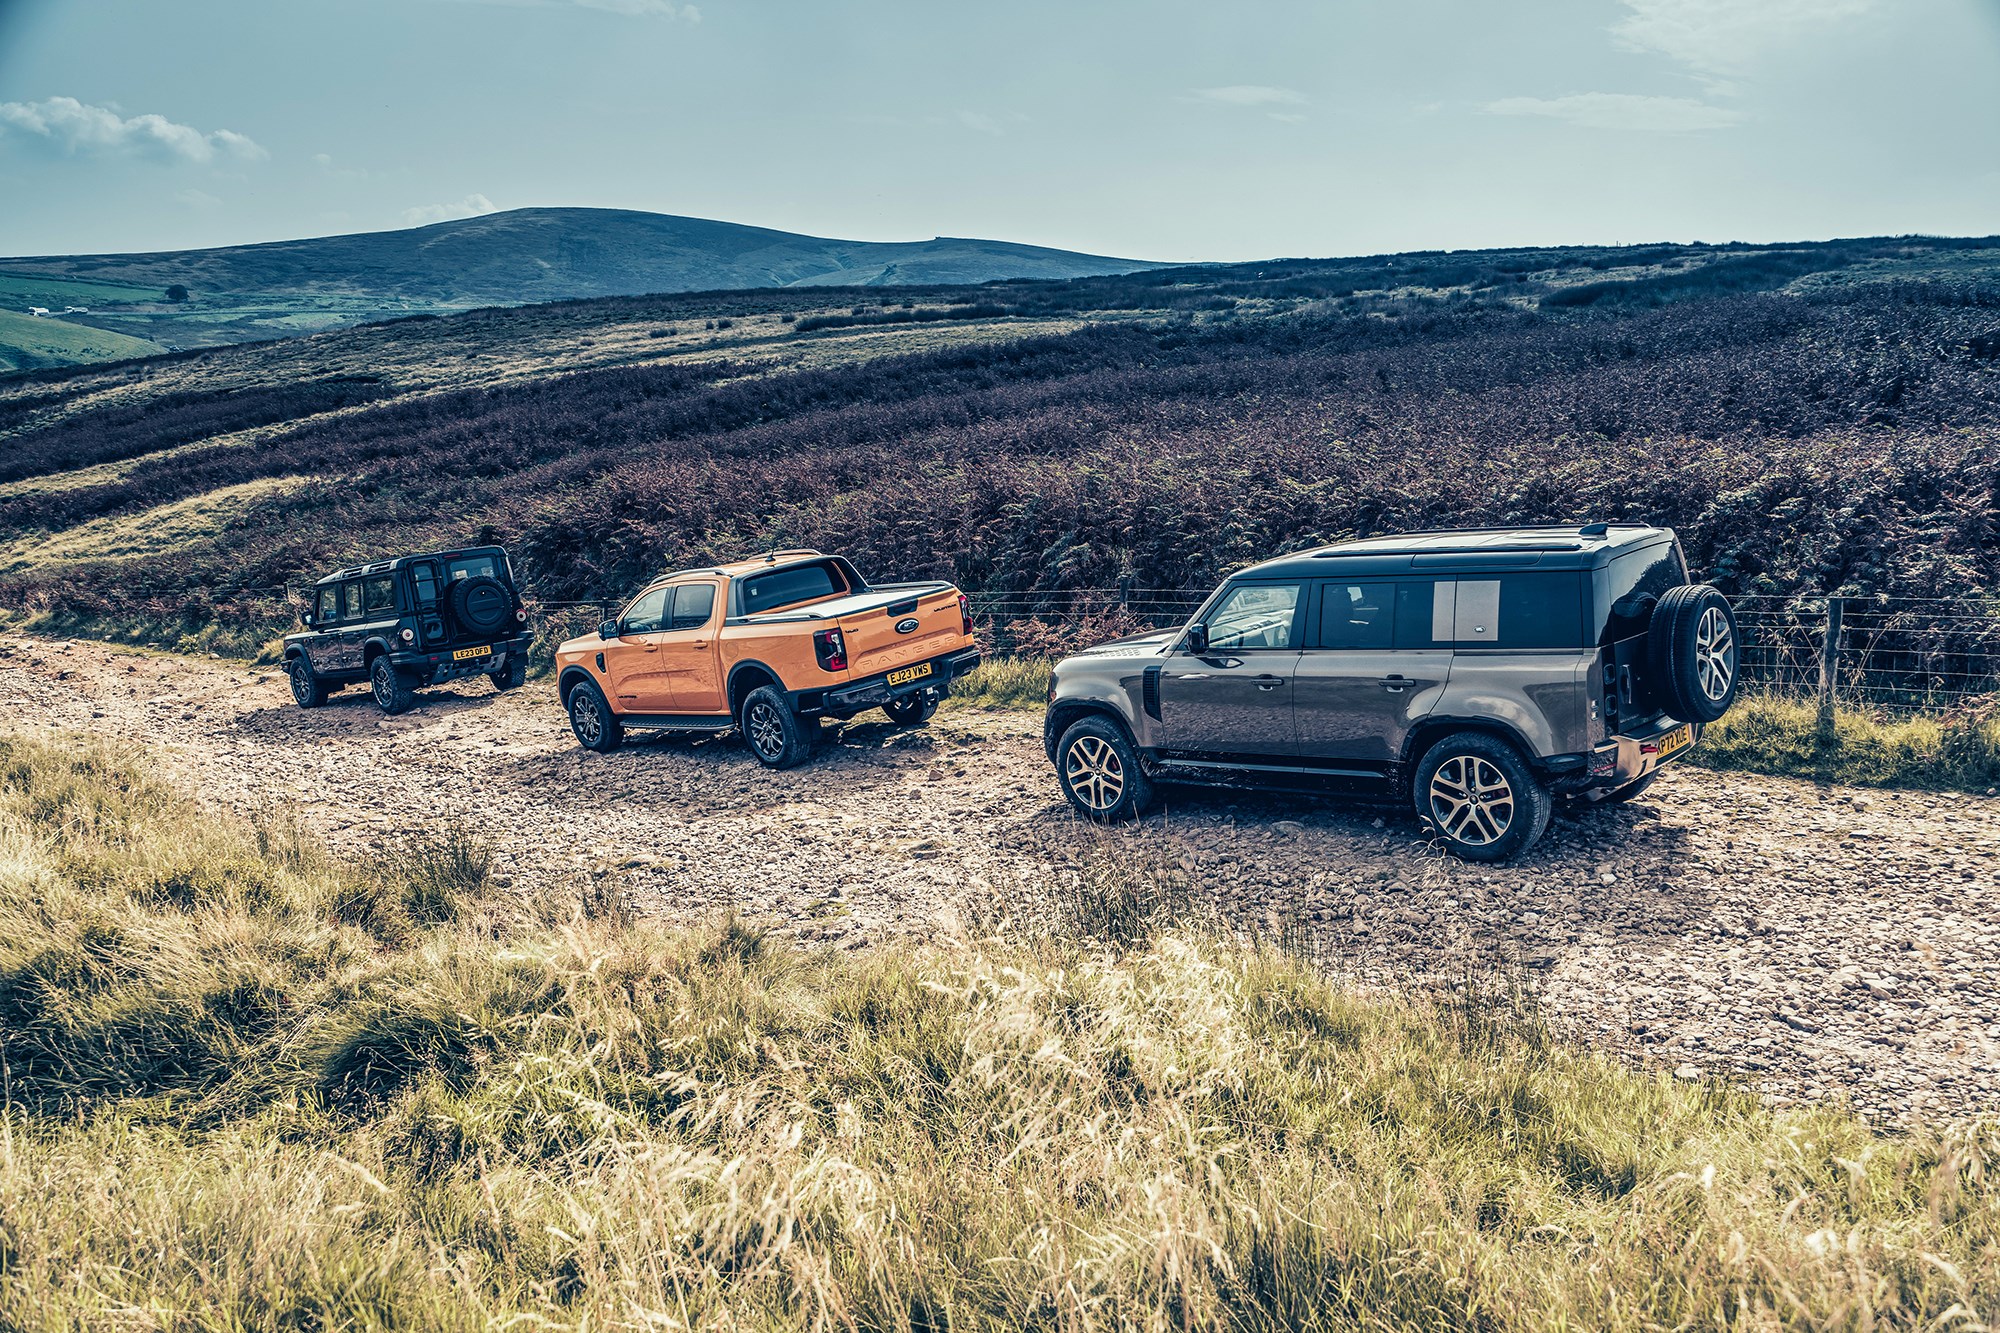 Ineos Grenadier vs Land Rover Defender vs Ford Ranger triple-test review:  Britain's toughest 4x4s tested on road – and off